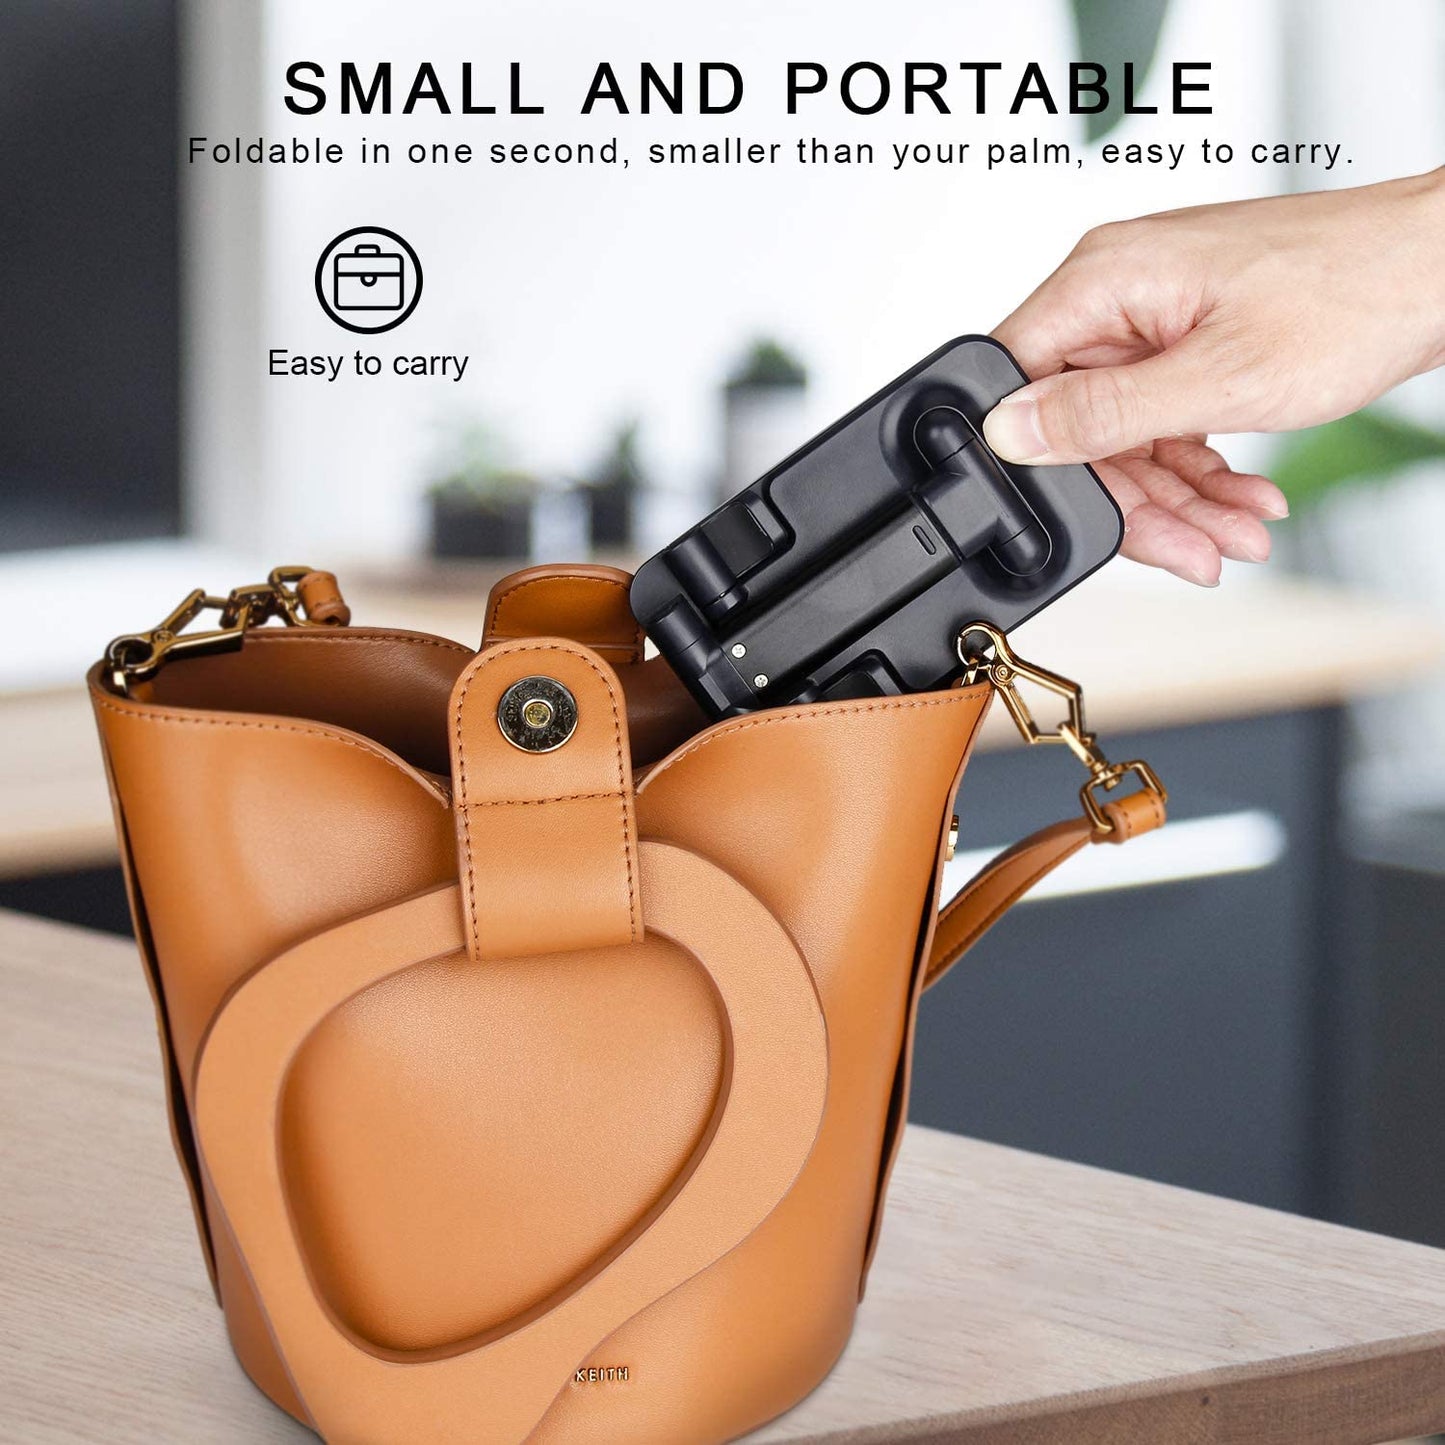 Mobile Phone Holder Can Be Foldable And Expandable